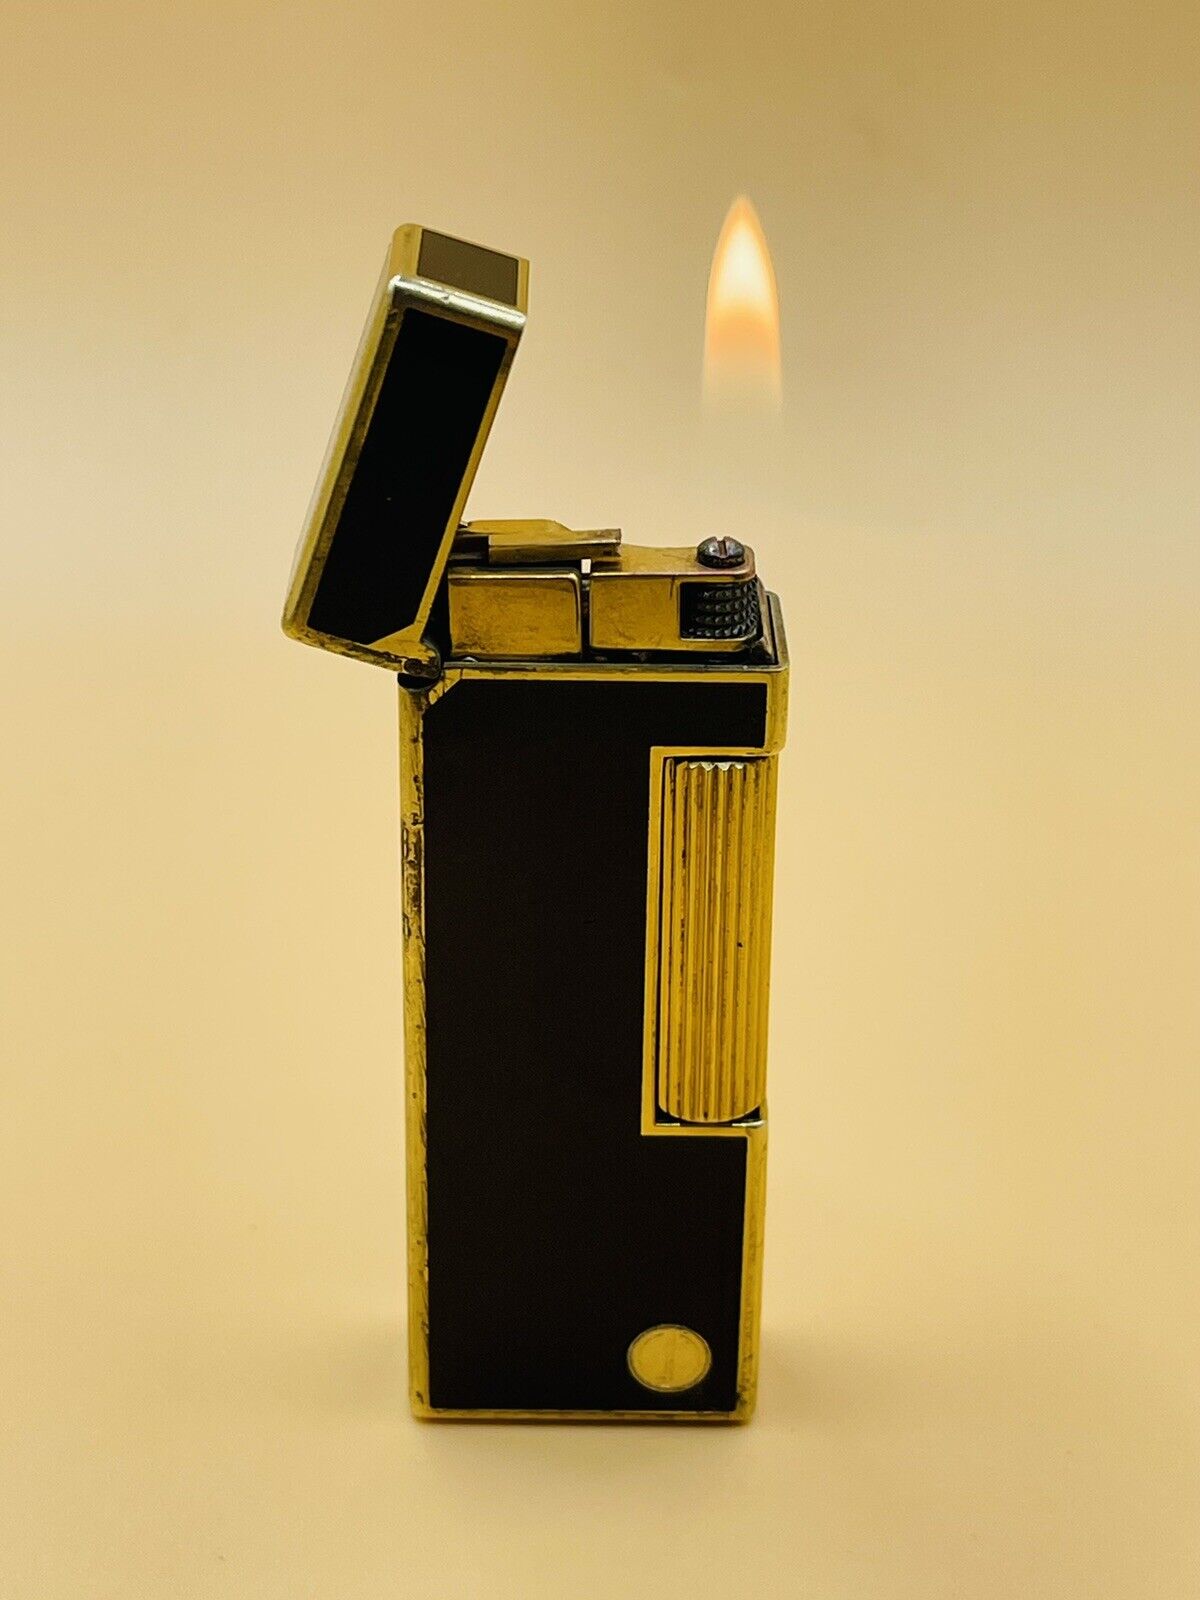 Dunhill rollagas lighter-black lacquer gold trim great working condition #2